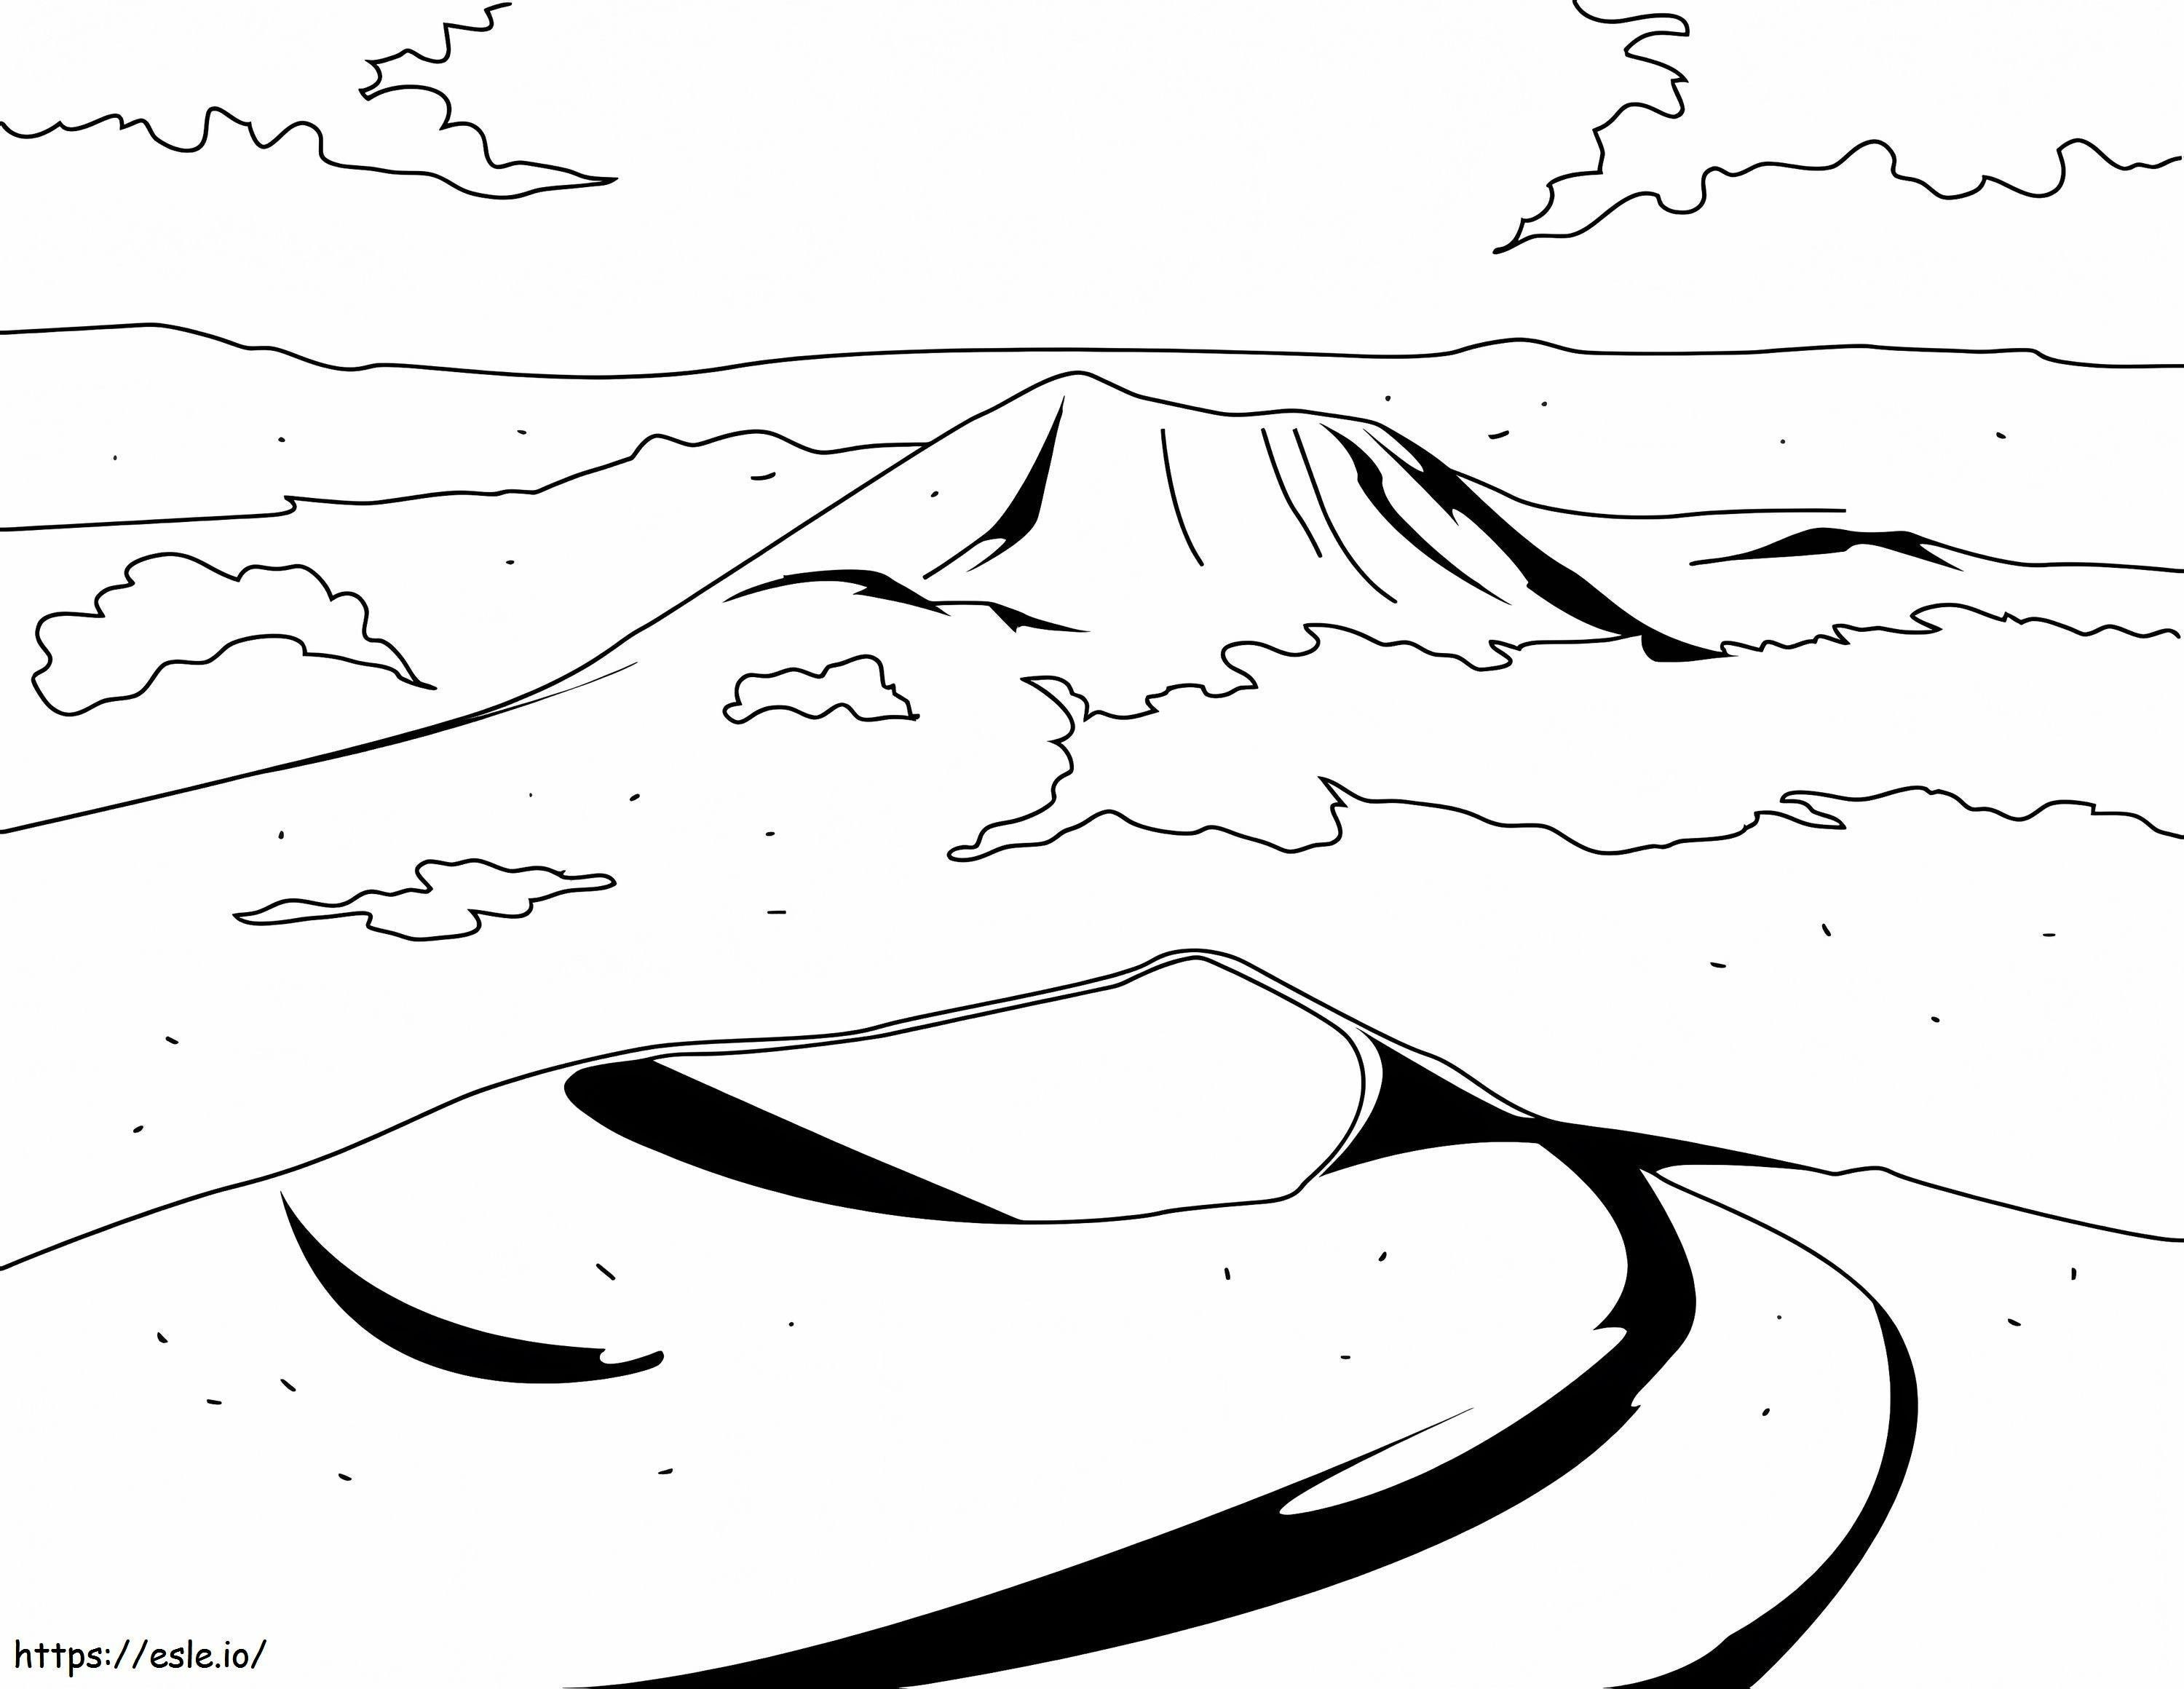 The Dormant Volcano coloring page